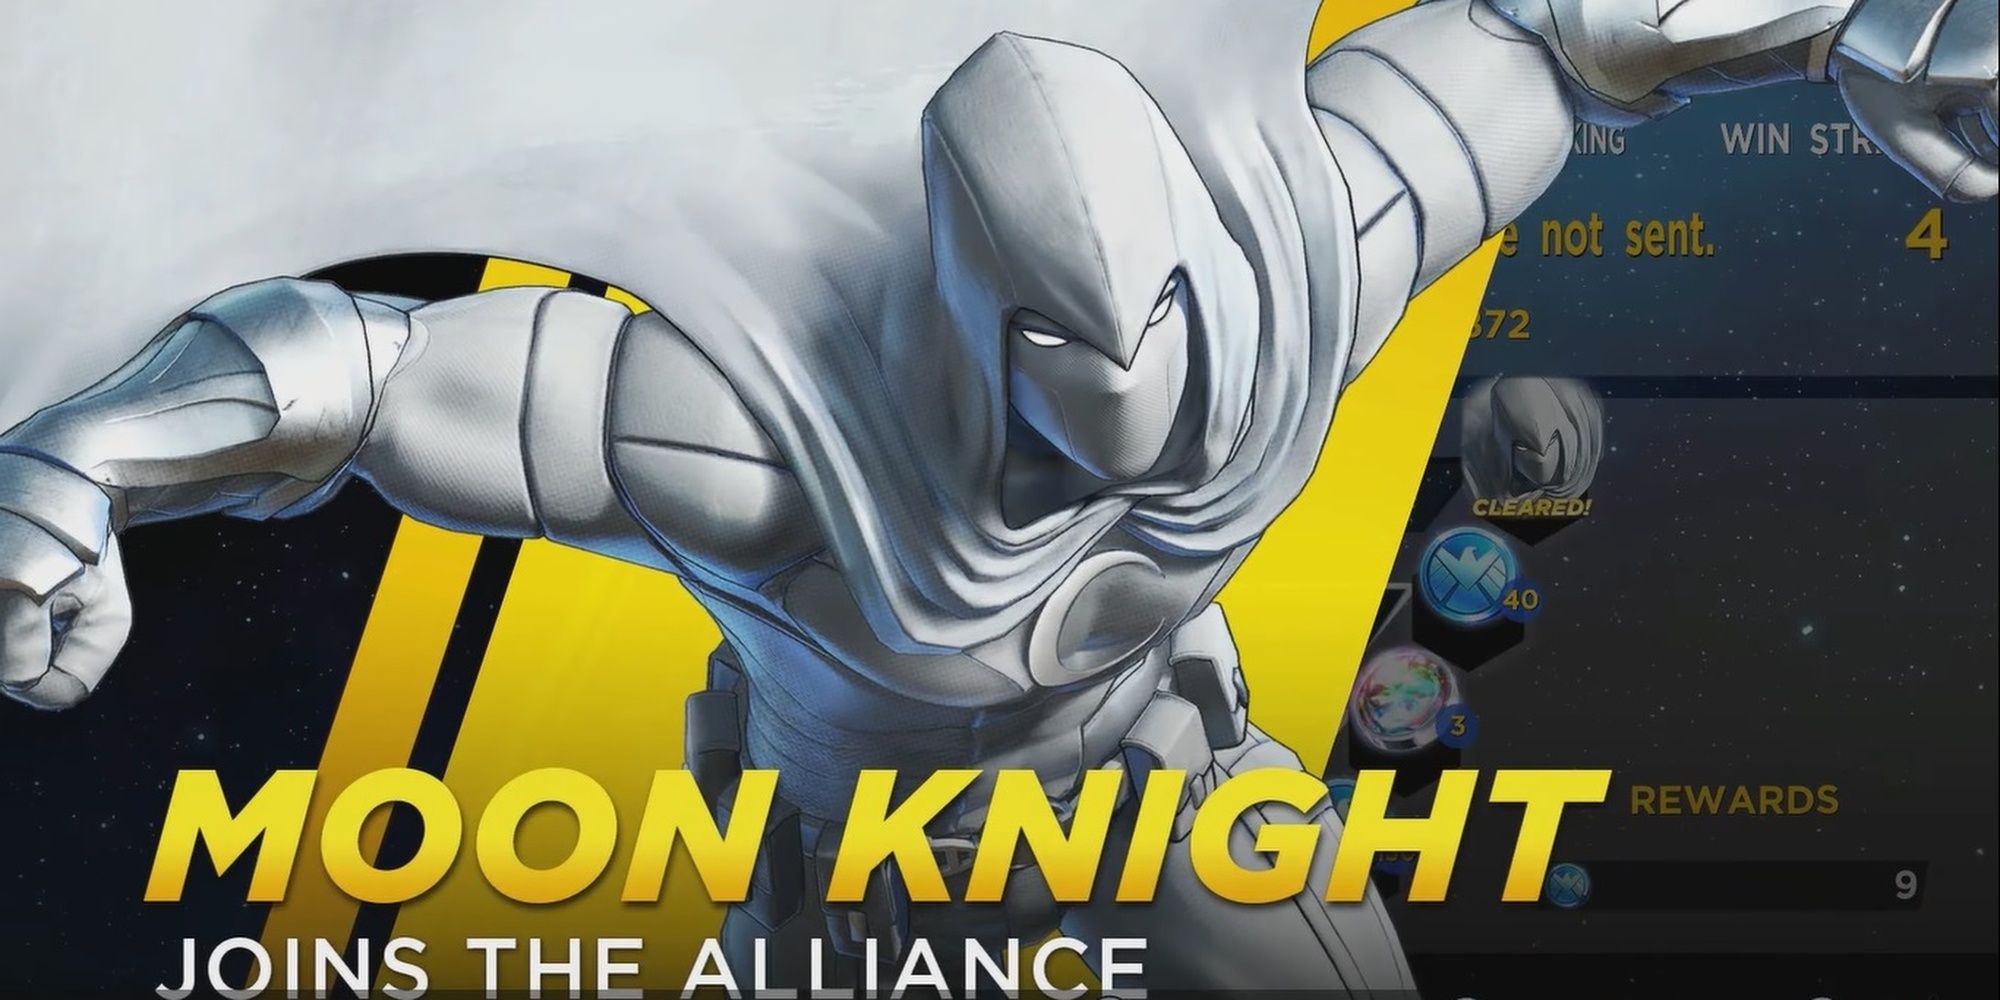 Moon Knight featured in Marvel Ultimate Alliance 3